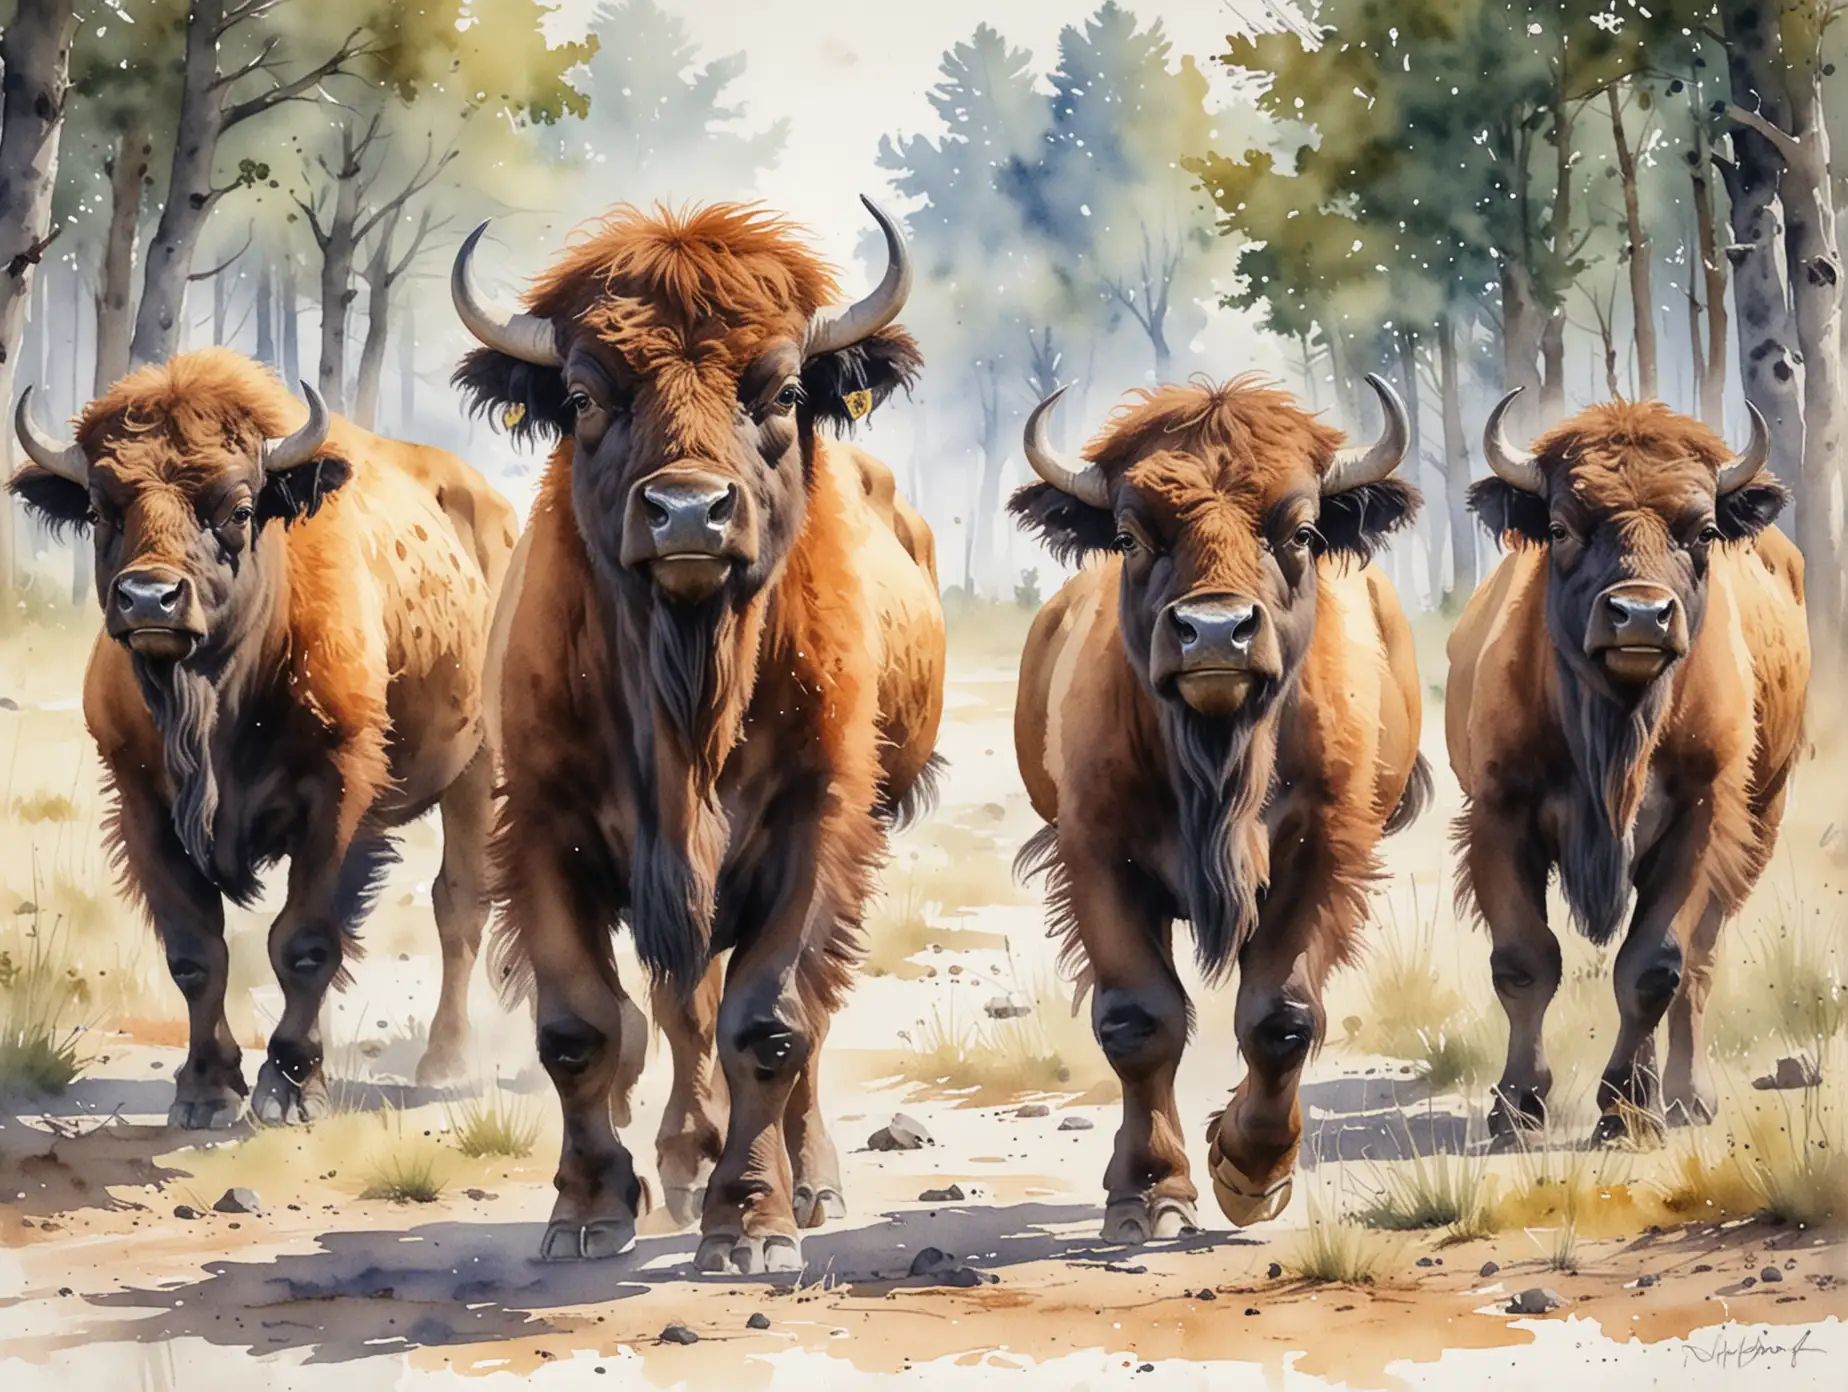 beautiful bison calves that look crazy, silly, funny, with big eyes and long legs, so the entrance in watercolor